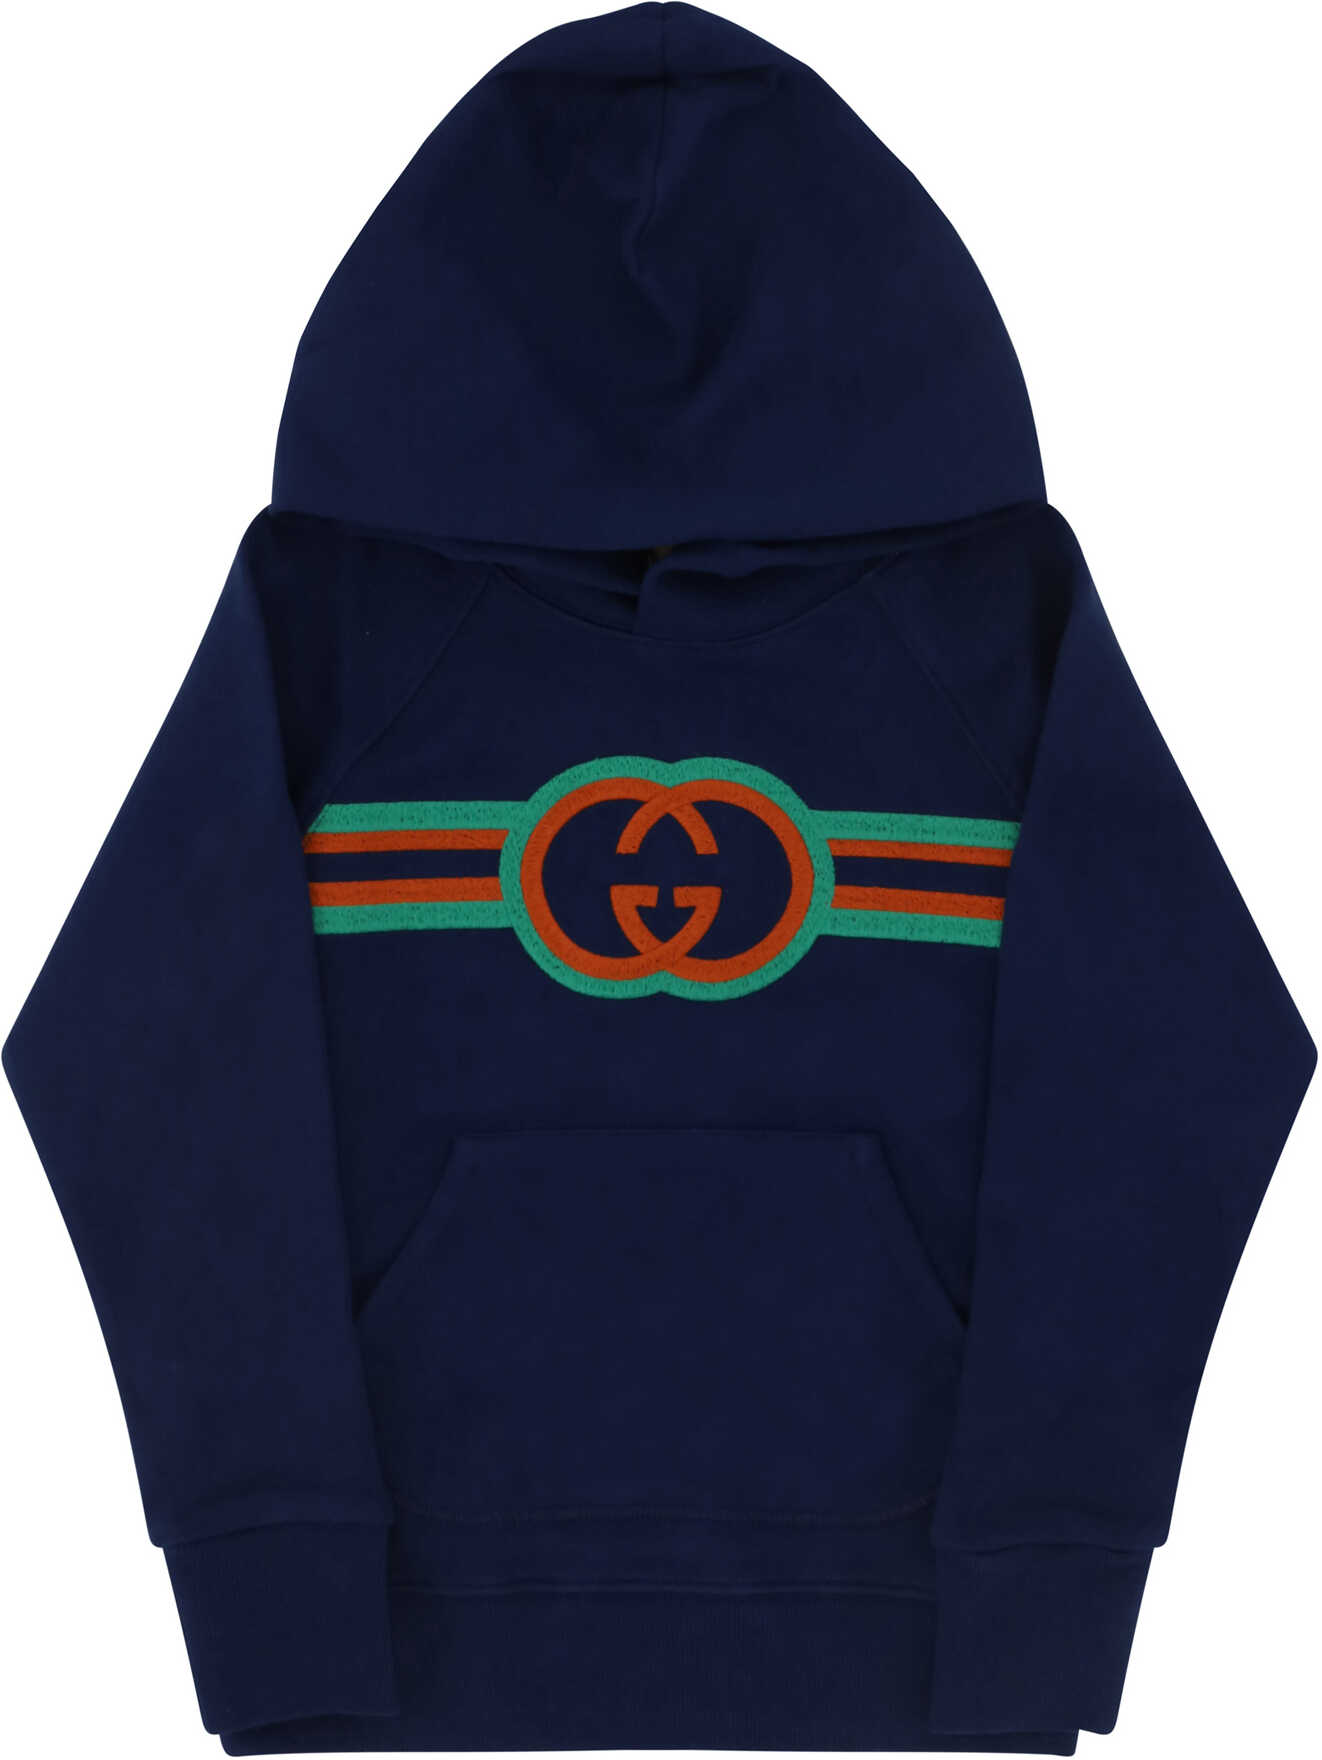 Gucci Hoodie for Boy PRUSSIAN BLUE/MIX